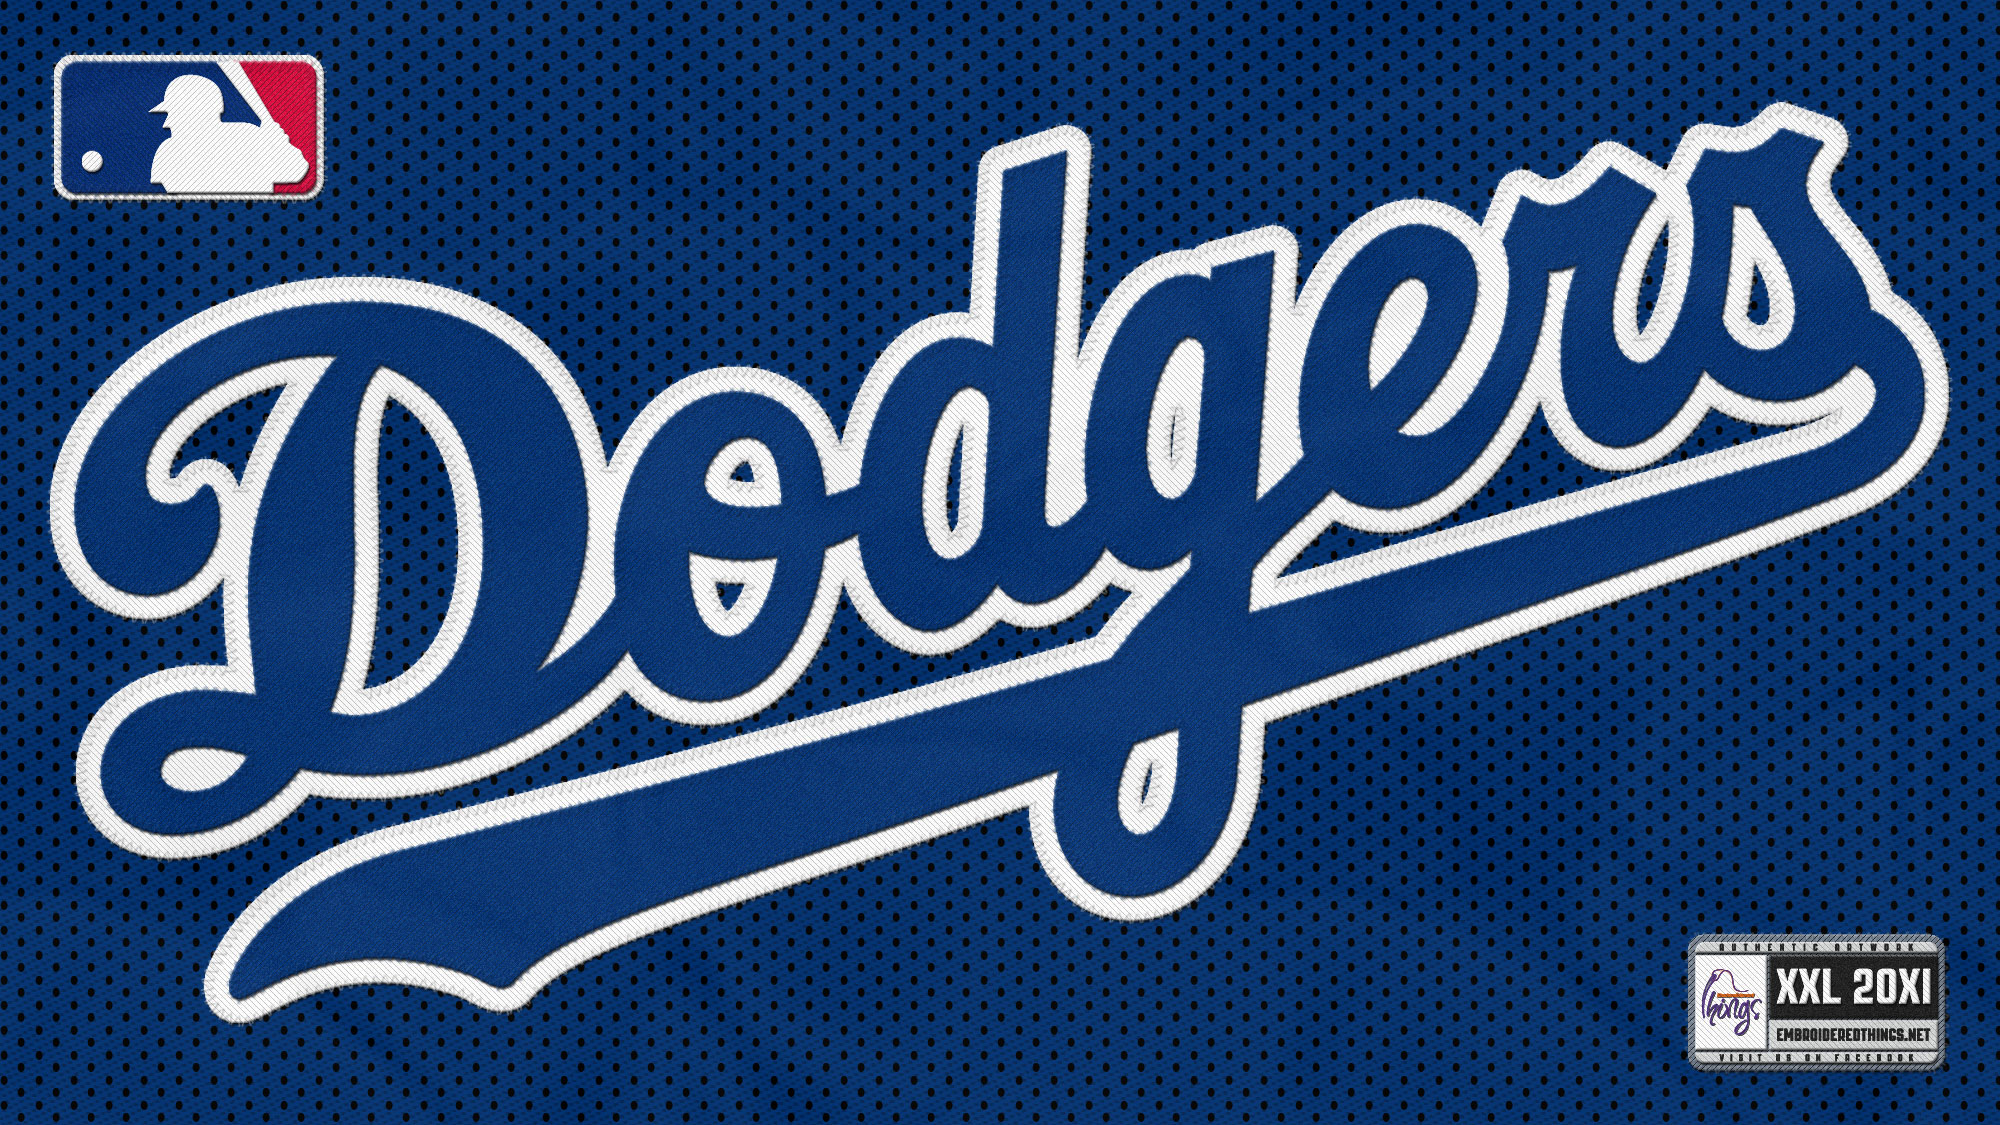 Los Angeles Dodgers wallpapers Los Angeles Dodgers background   Page 2000x1125